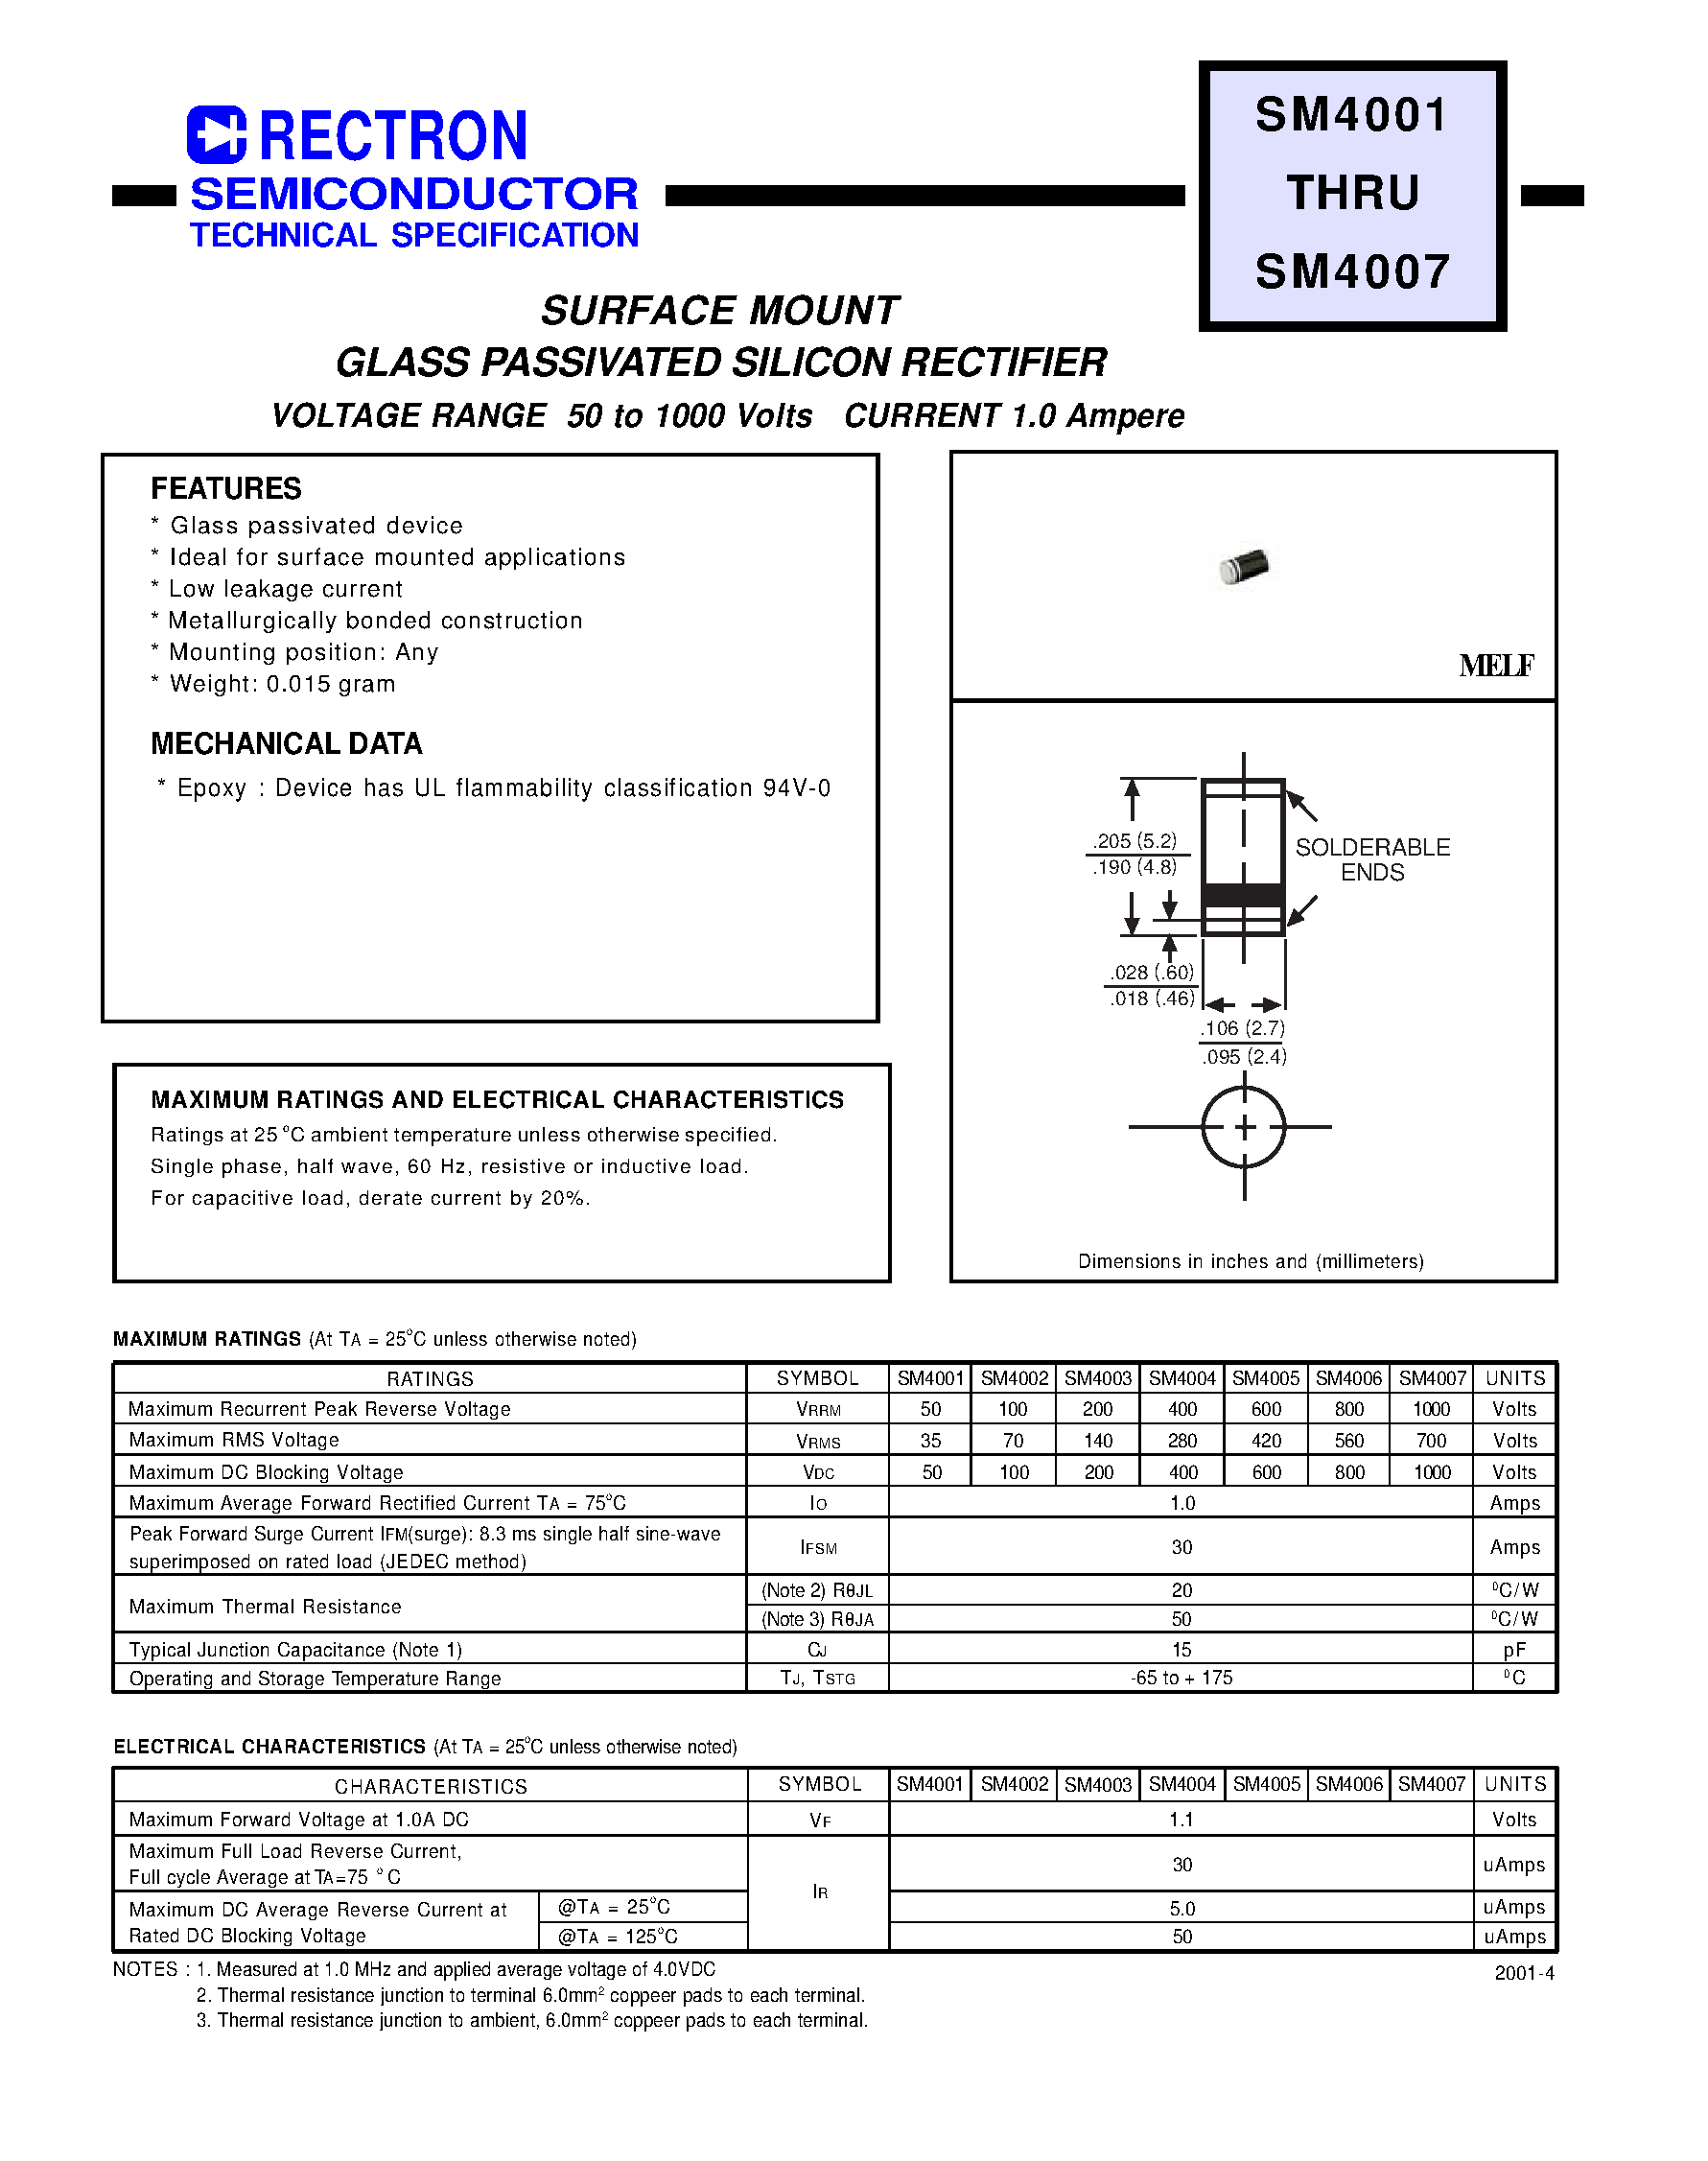 Даташит SM4003 - SURFACE MOUNT GLASS PASSIVATED SILICON RECTIFIER (VOLTAGE RANGE 50 to 1000 Volts CURRENT 1.0 Ampere) страница 1